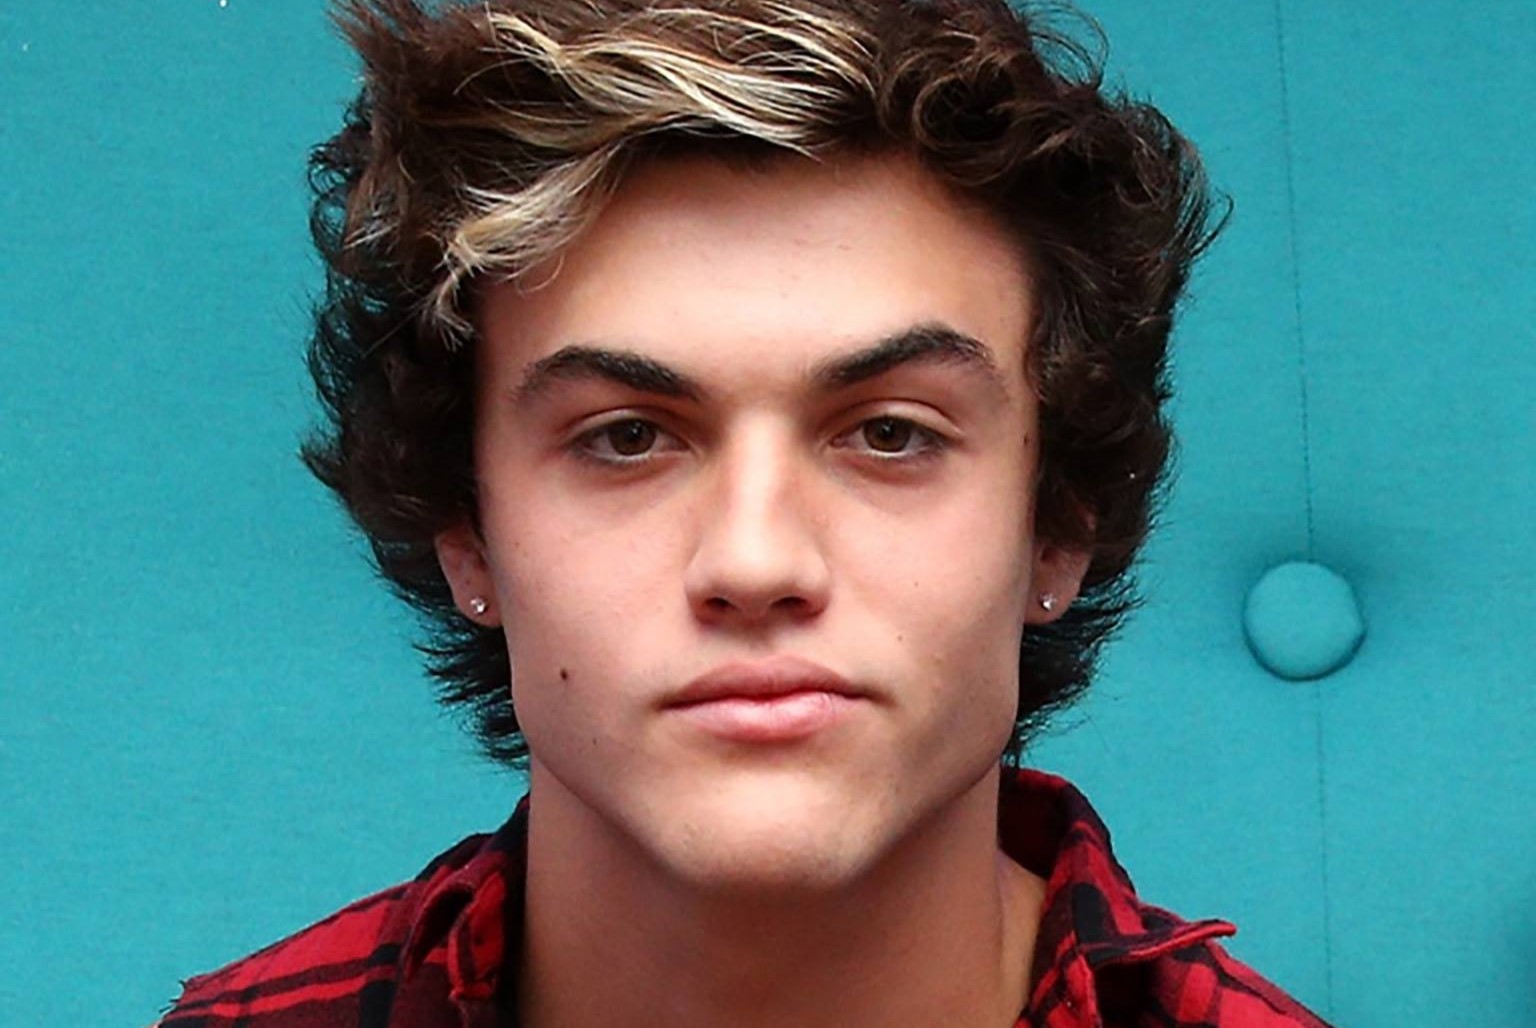 12 Captivating Facts About Ethan Dolan - Facts.net